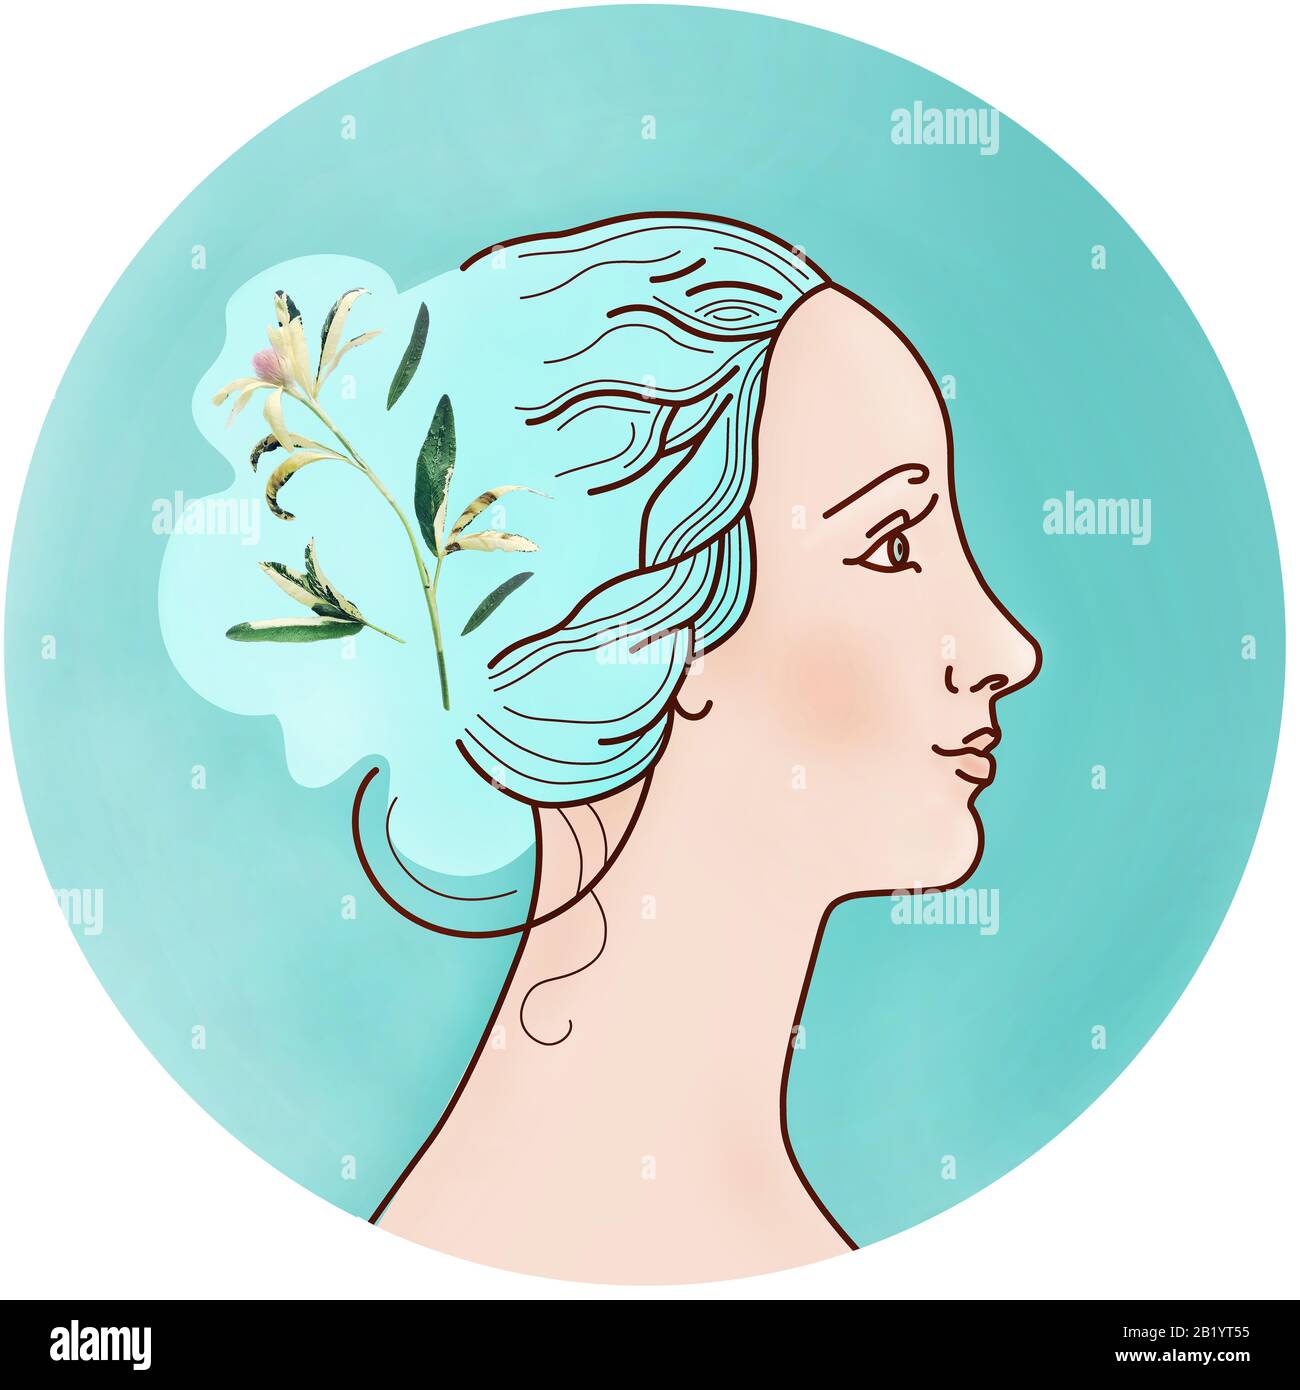 Spring illustration of Female Profile, face of a beautiful girl with flowers in hair on a blue round background. Icon, logo, avatar, flat picture for Stock Photo